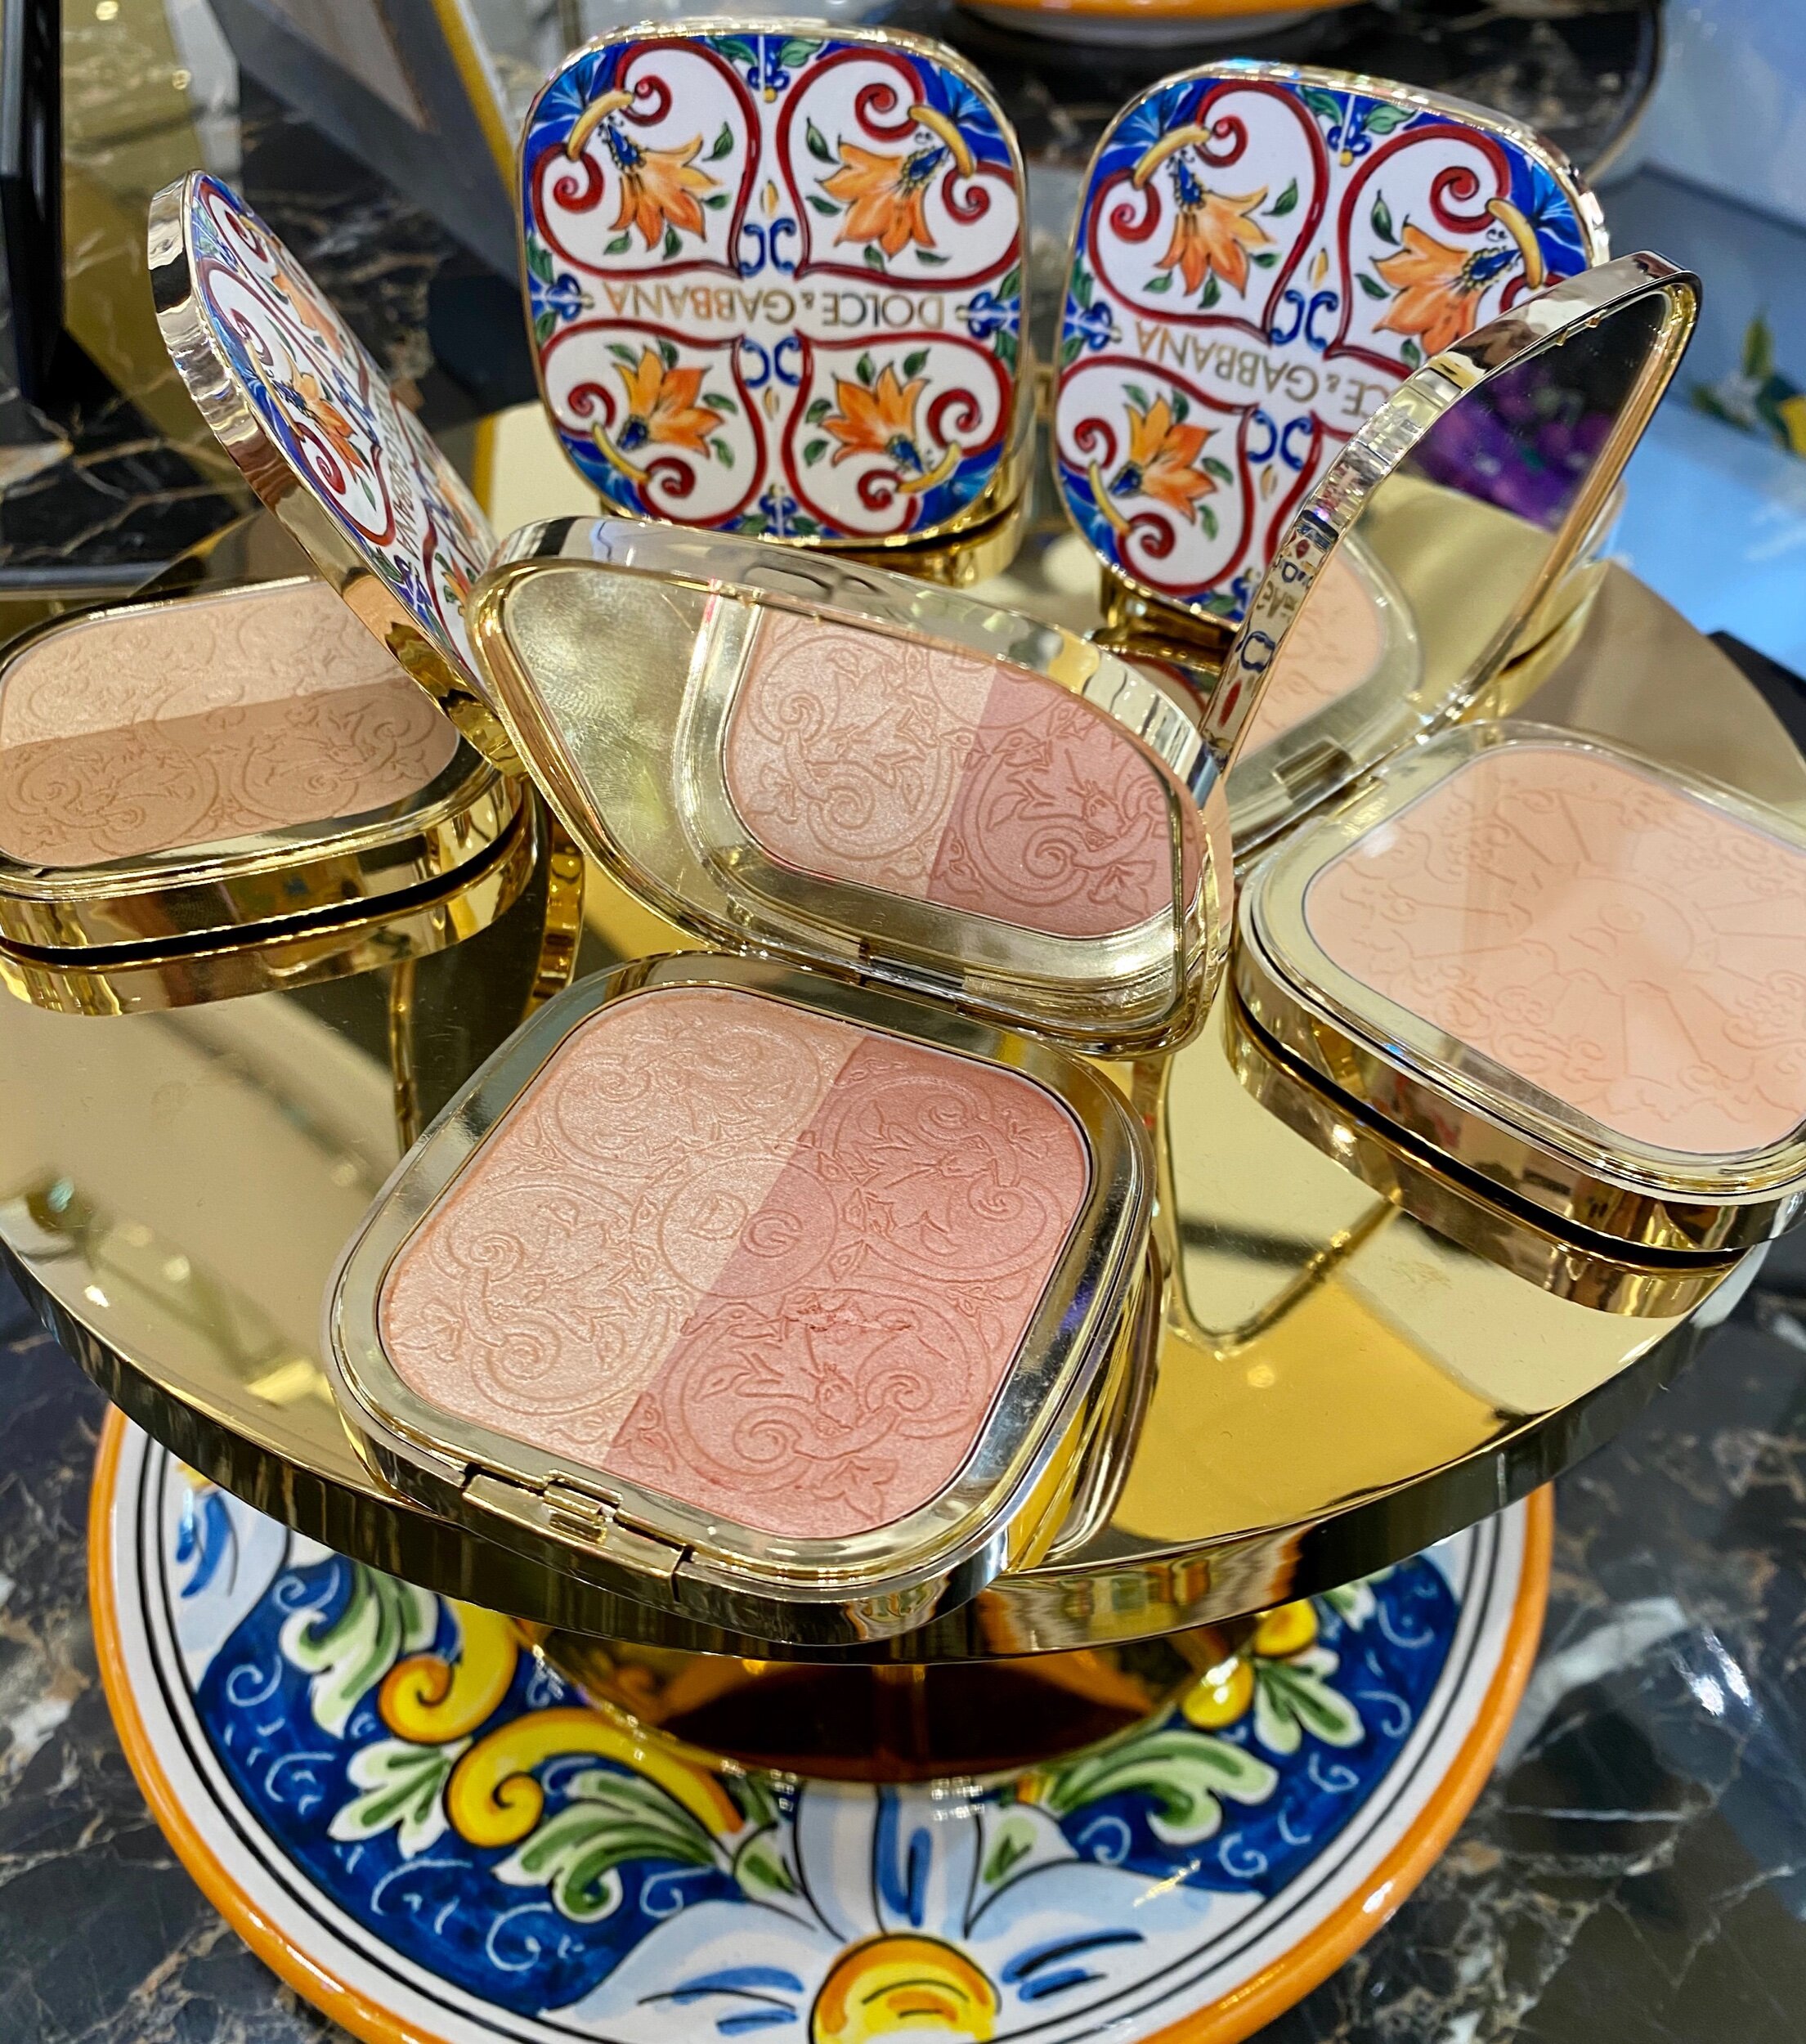 Dolce Gabbana Beauty Solar Glow Illuminating Powder Duo Review and Swatches  & D&G the Love Collector Limited Edition Highlighter — Survivorpeach